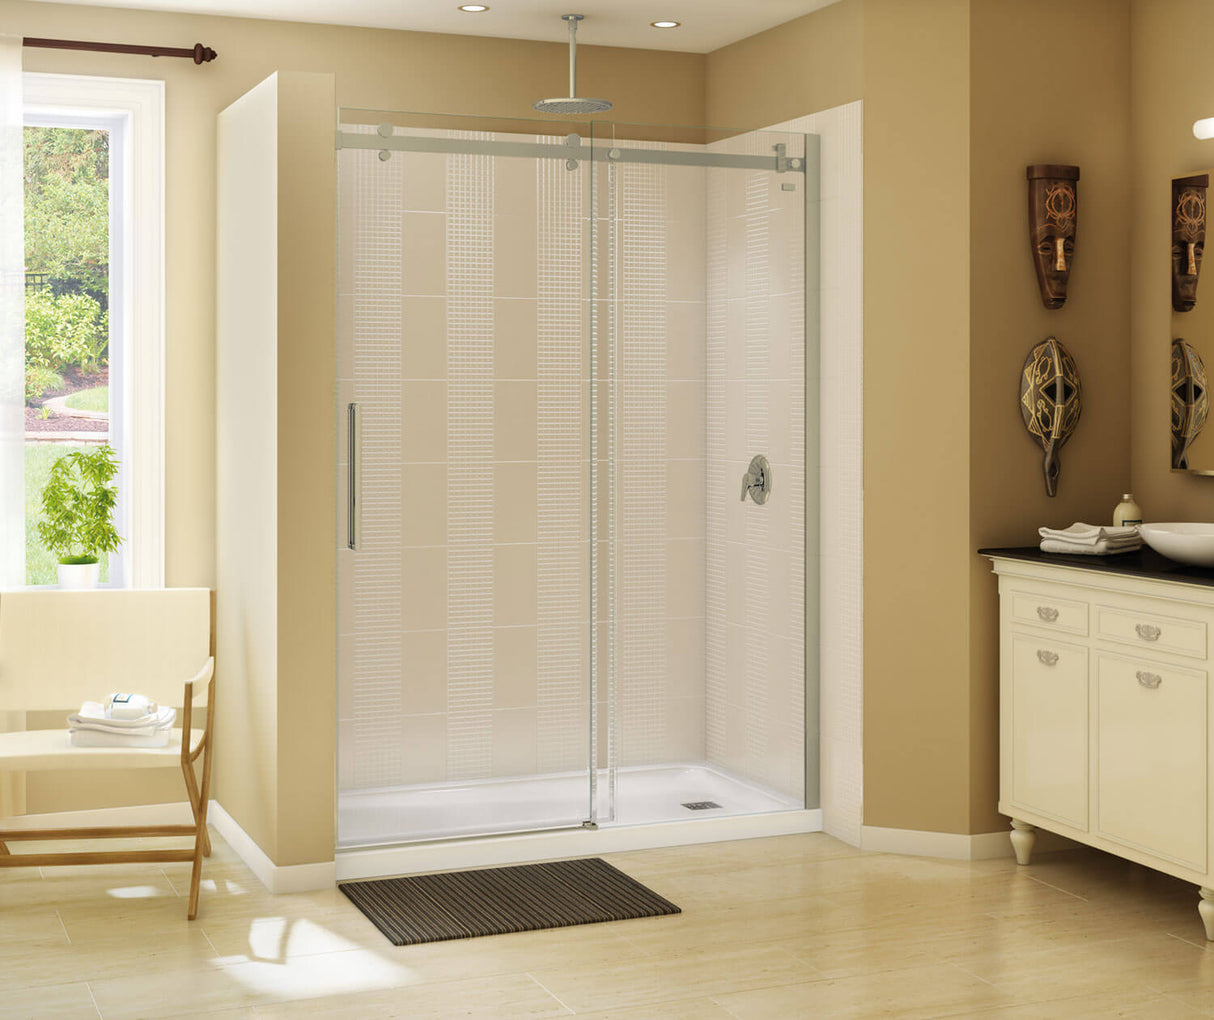 MAAX 106012-000-001-001 Olympia Square 6032 Acrylic Alcove or Corner Shower Base in White with Left-Hand Drain